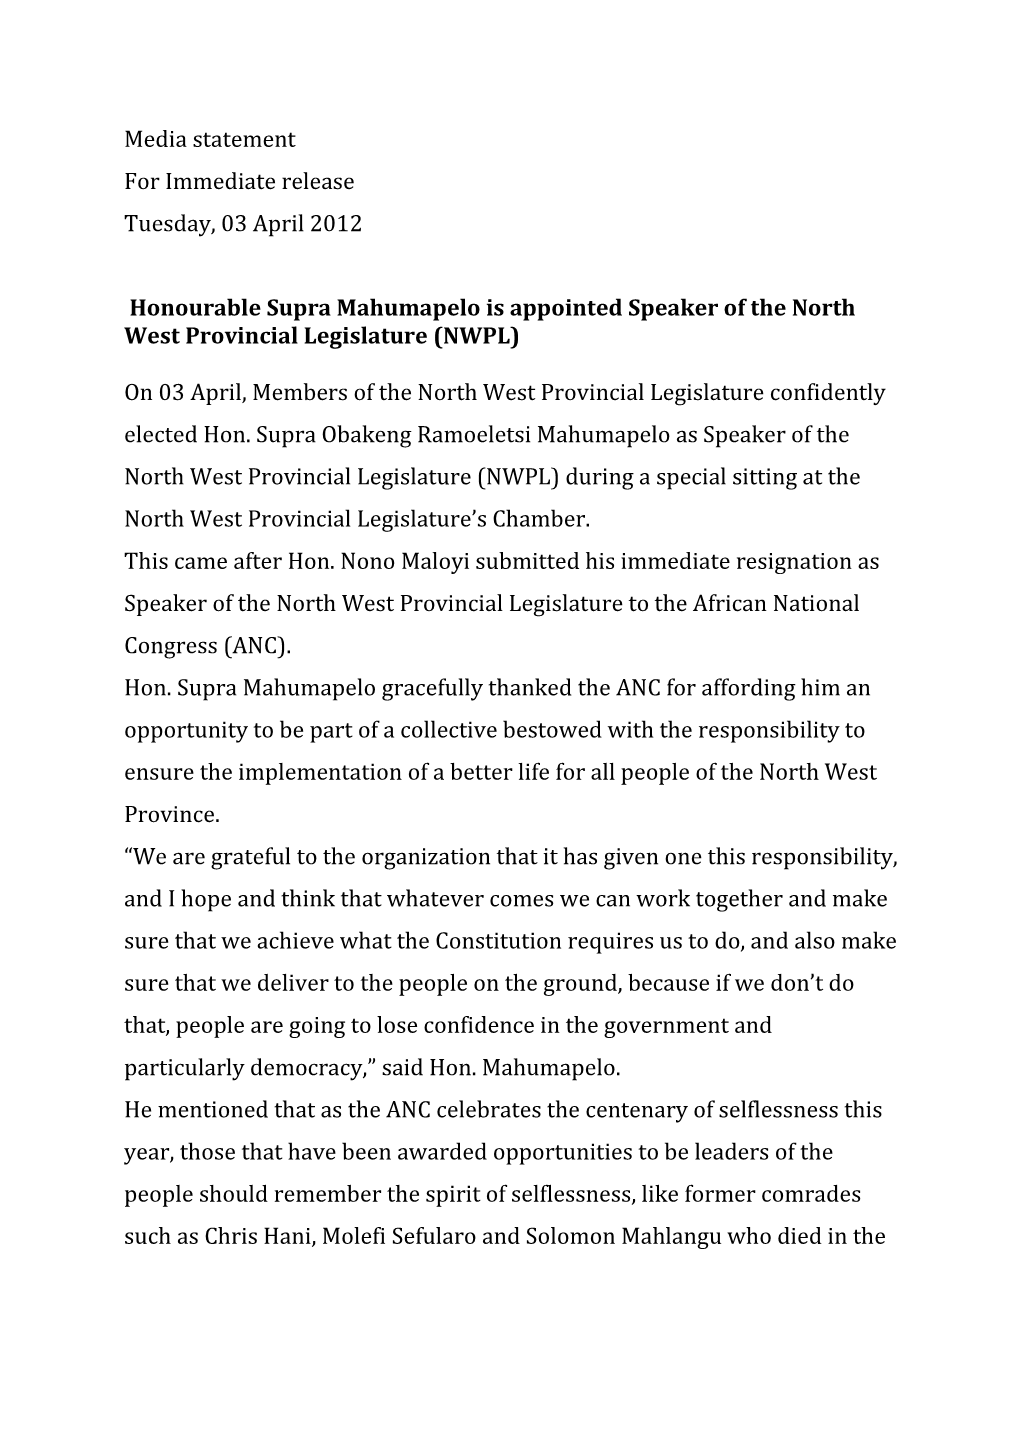 Media Statement for Immediate Release Tuesday, 03 April 2012